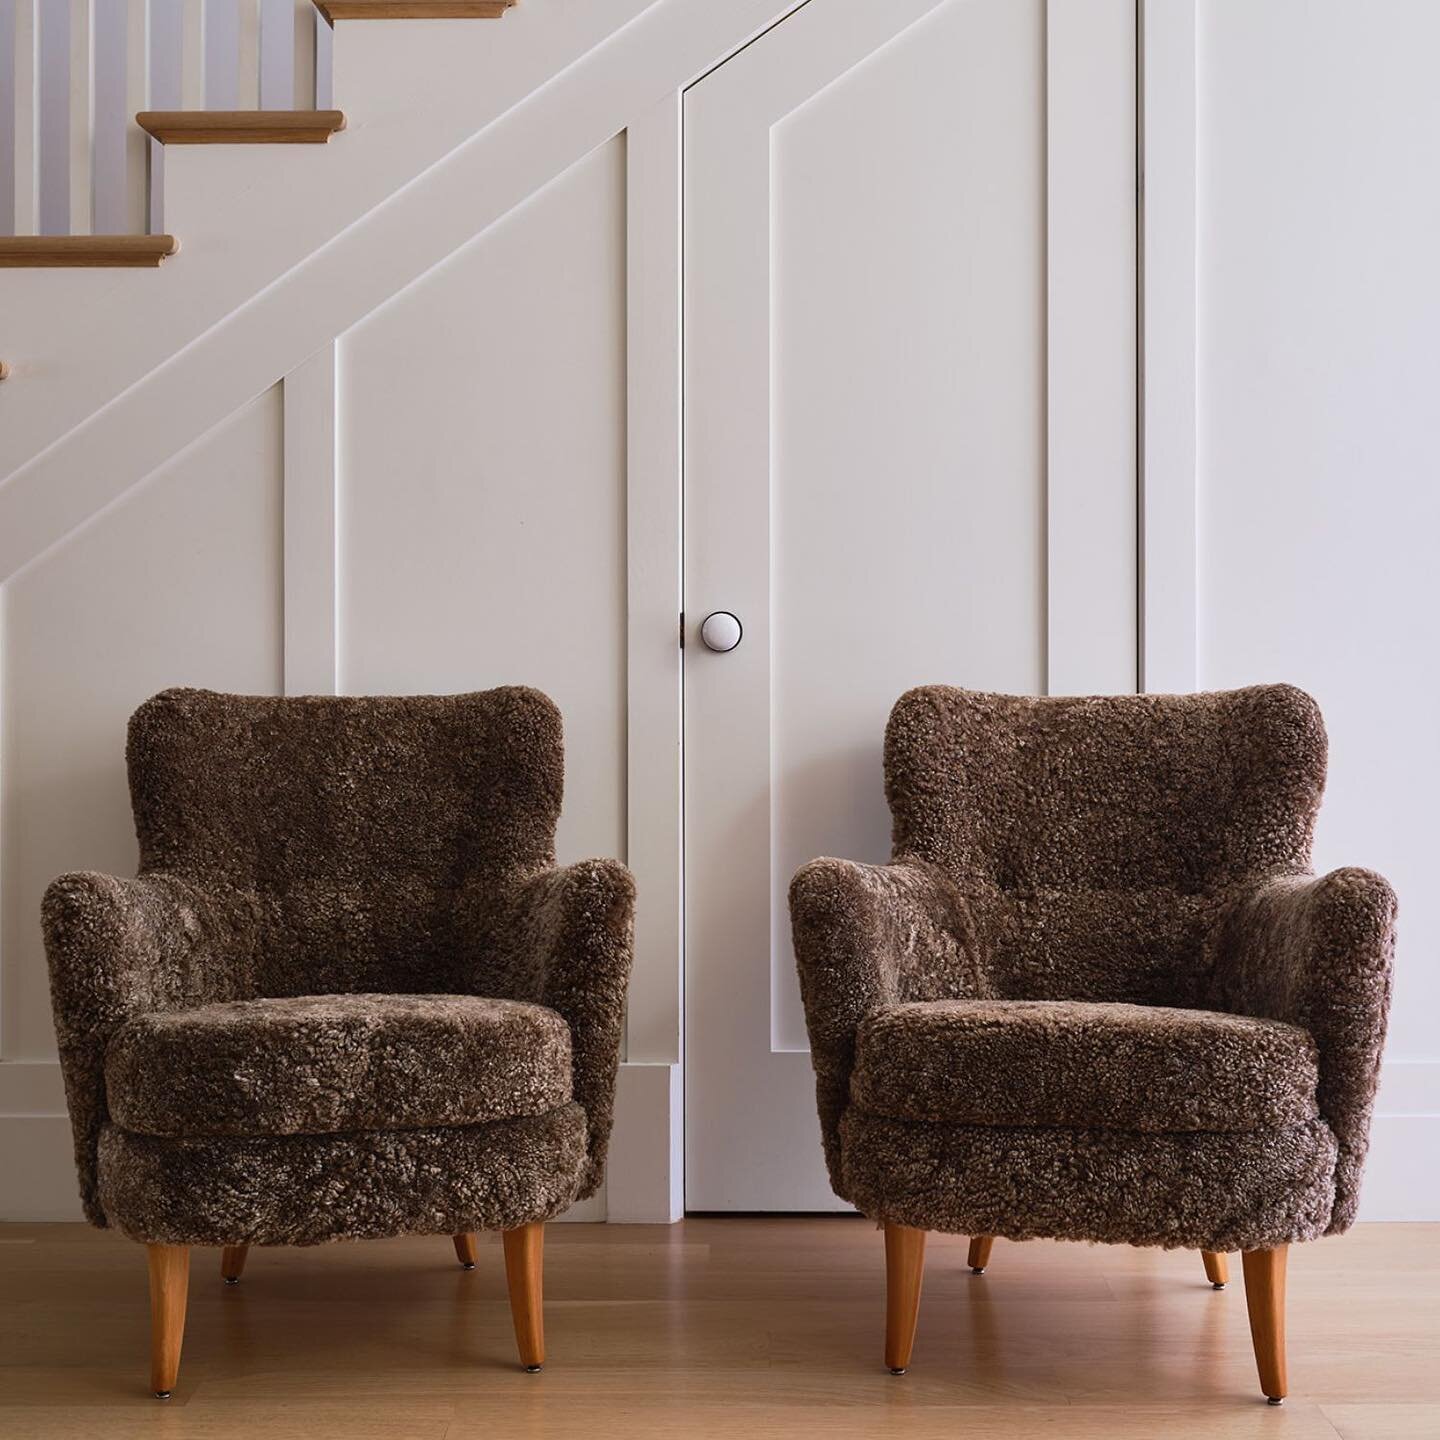 JUST LISTED. Sourced by @anjamichalsdesign these heirloom vintage Swedish chairs, upholstered in a soft, rich, chocolate brown shearling wool will be the focal point in any room. 

Photography: @_jessicaburke 

#vintage #armchair #swedish #sheepskin 